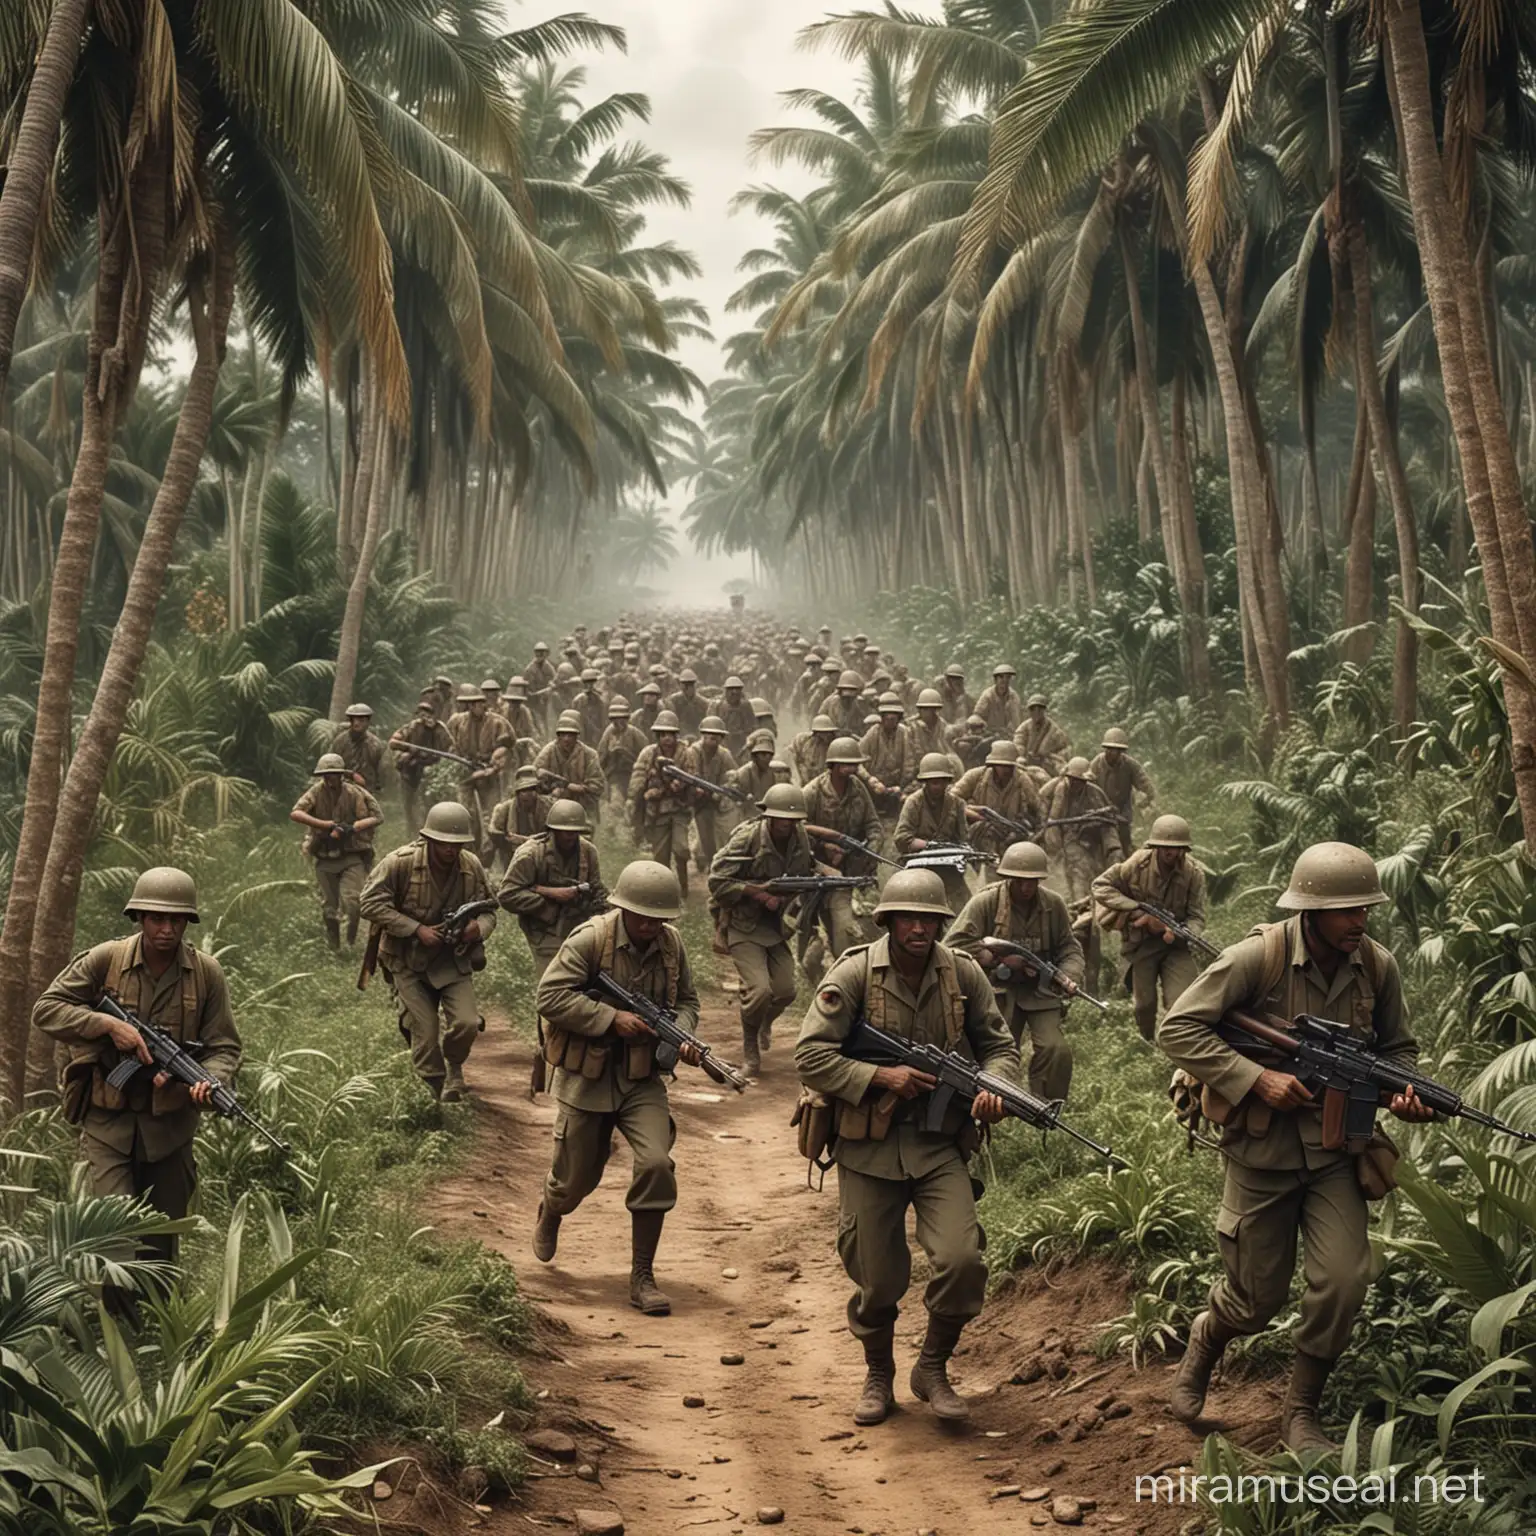 Tropical Land Invasion Soldiers Engage in Combat for Strategic Control